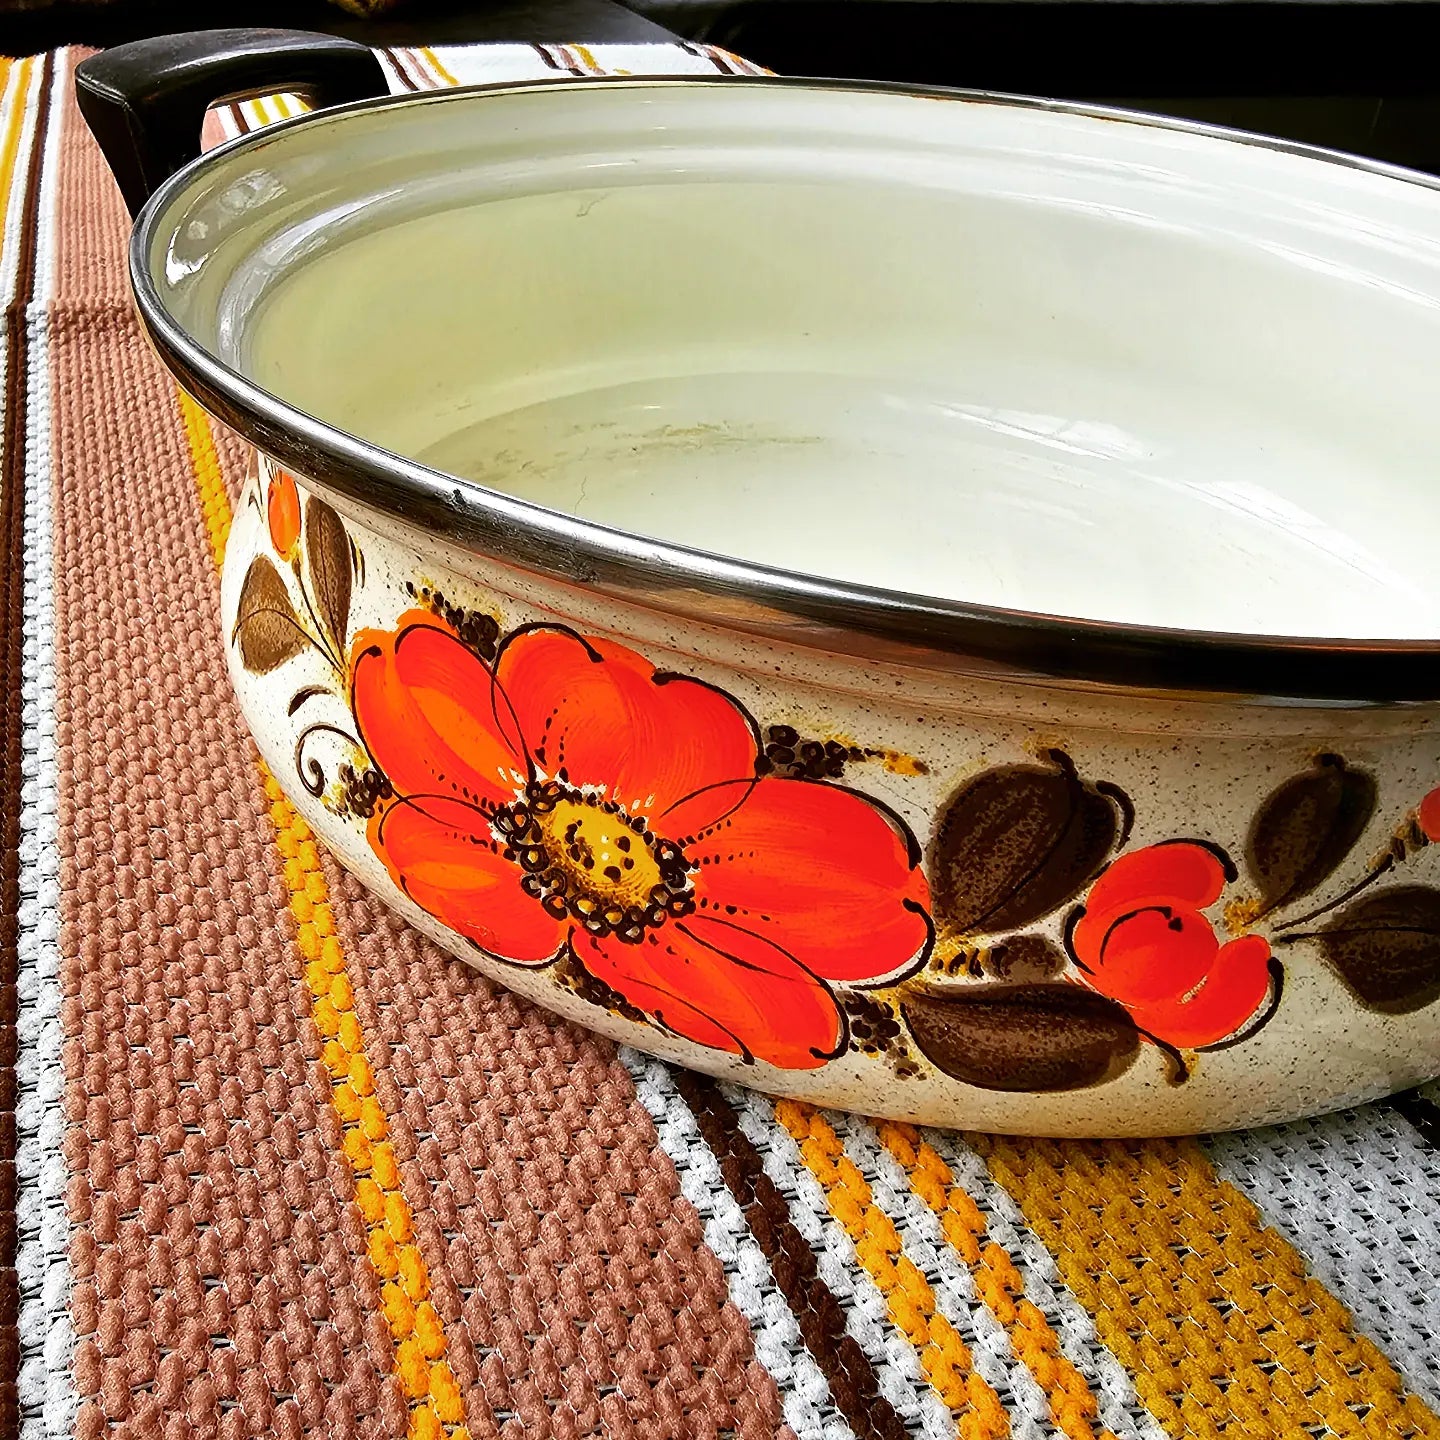 Sanko Enameled Vintage Cookware From Japan Show Pans Mid Century